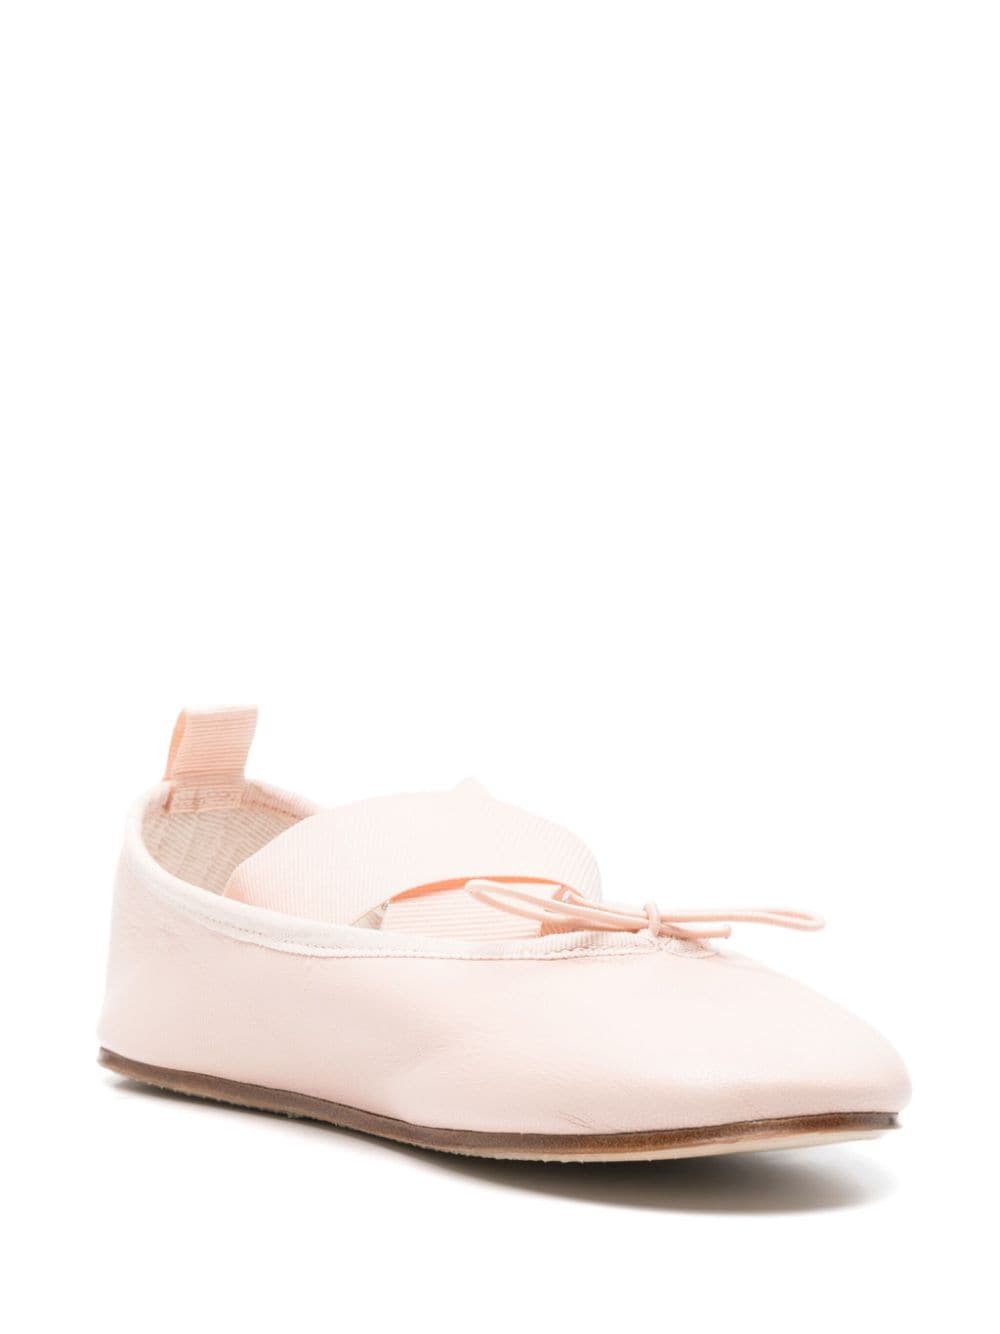 Shop Repetto Gianna Leather Ballerina Shoes In Pink